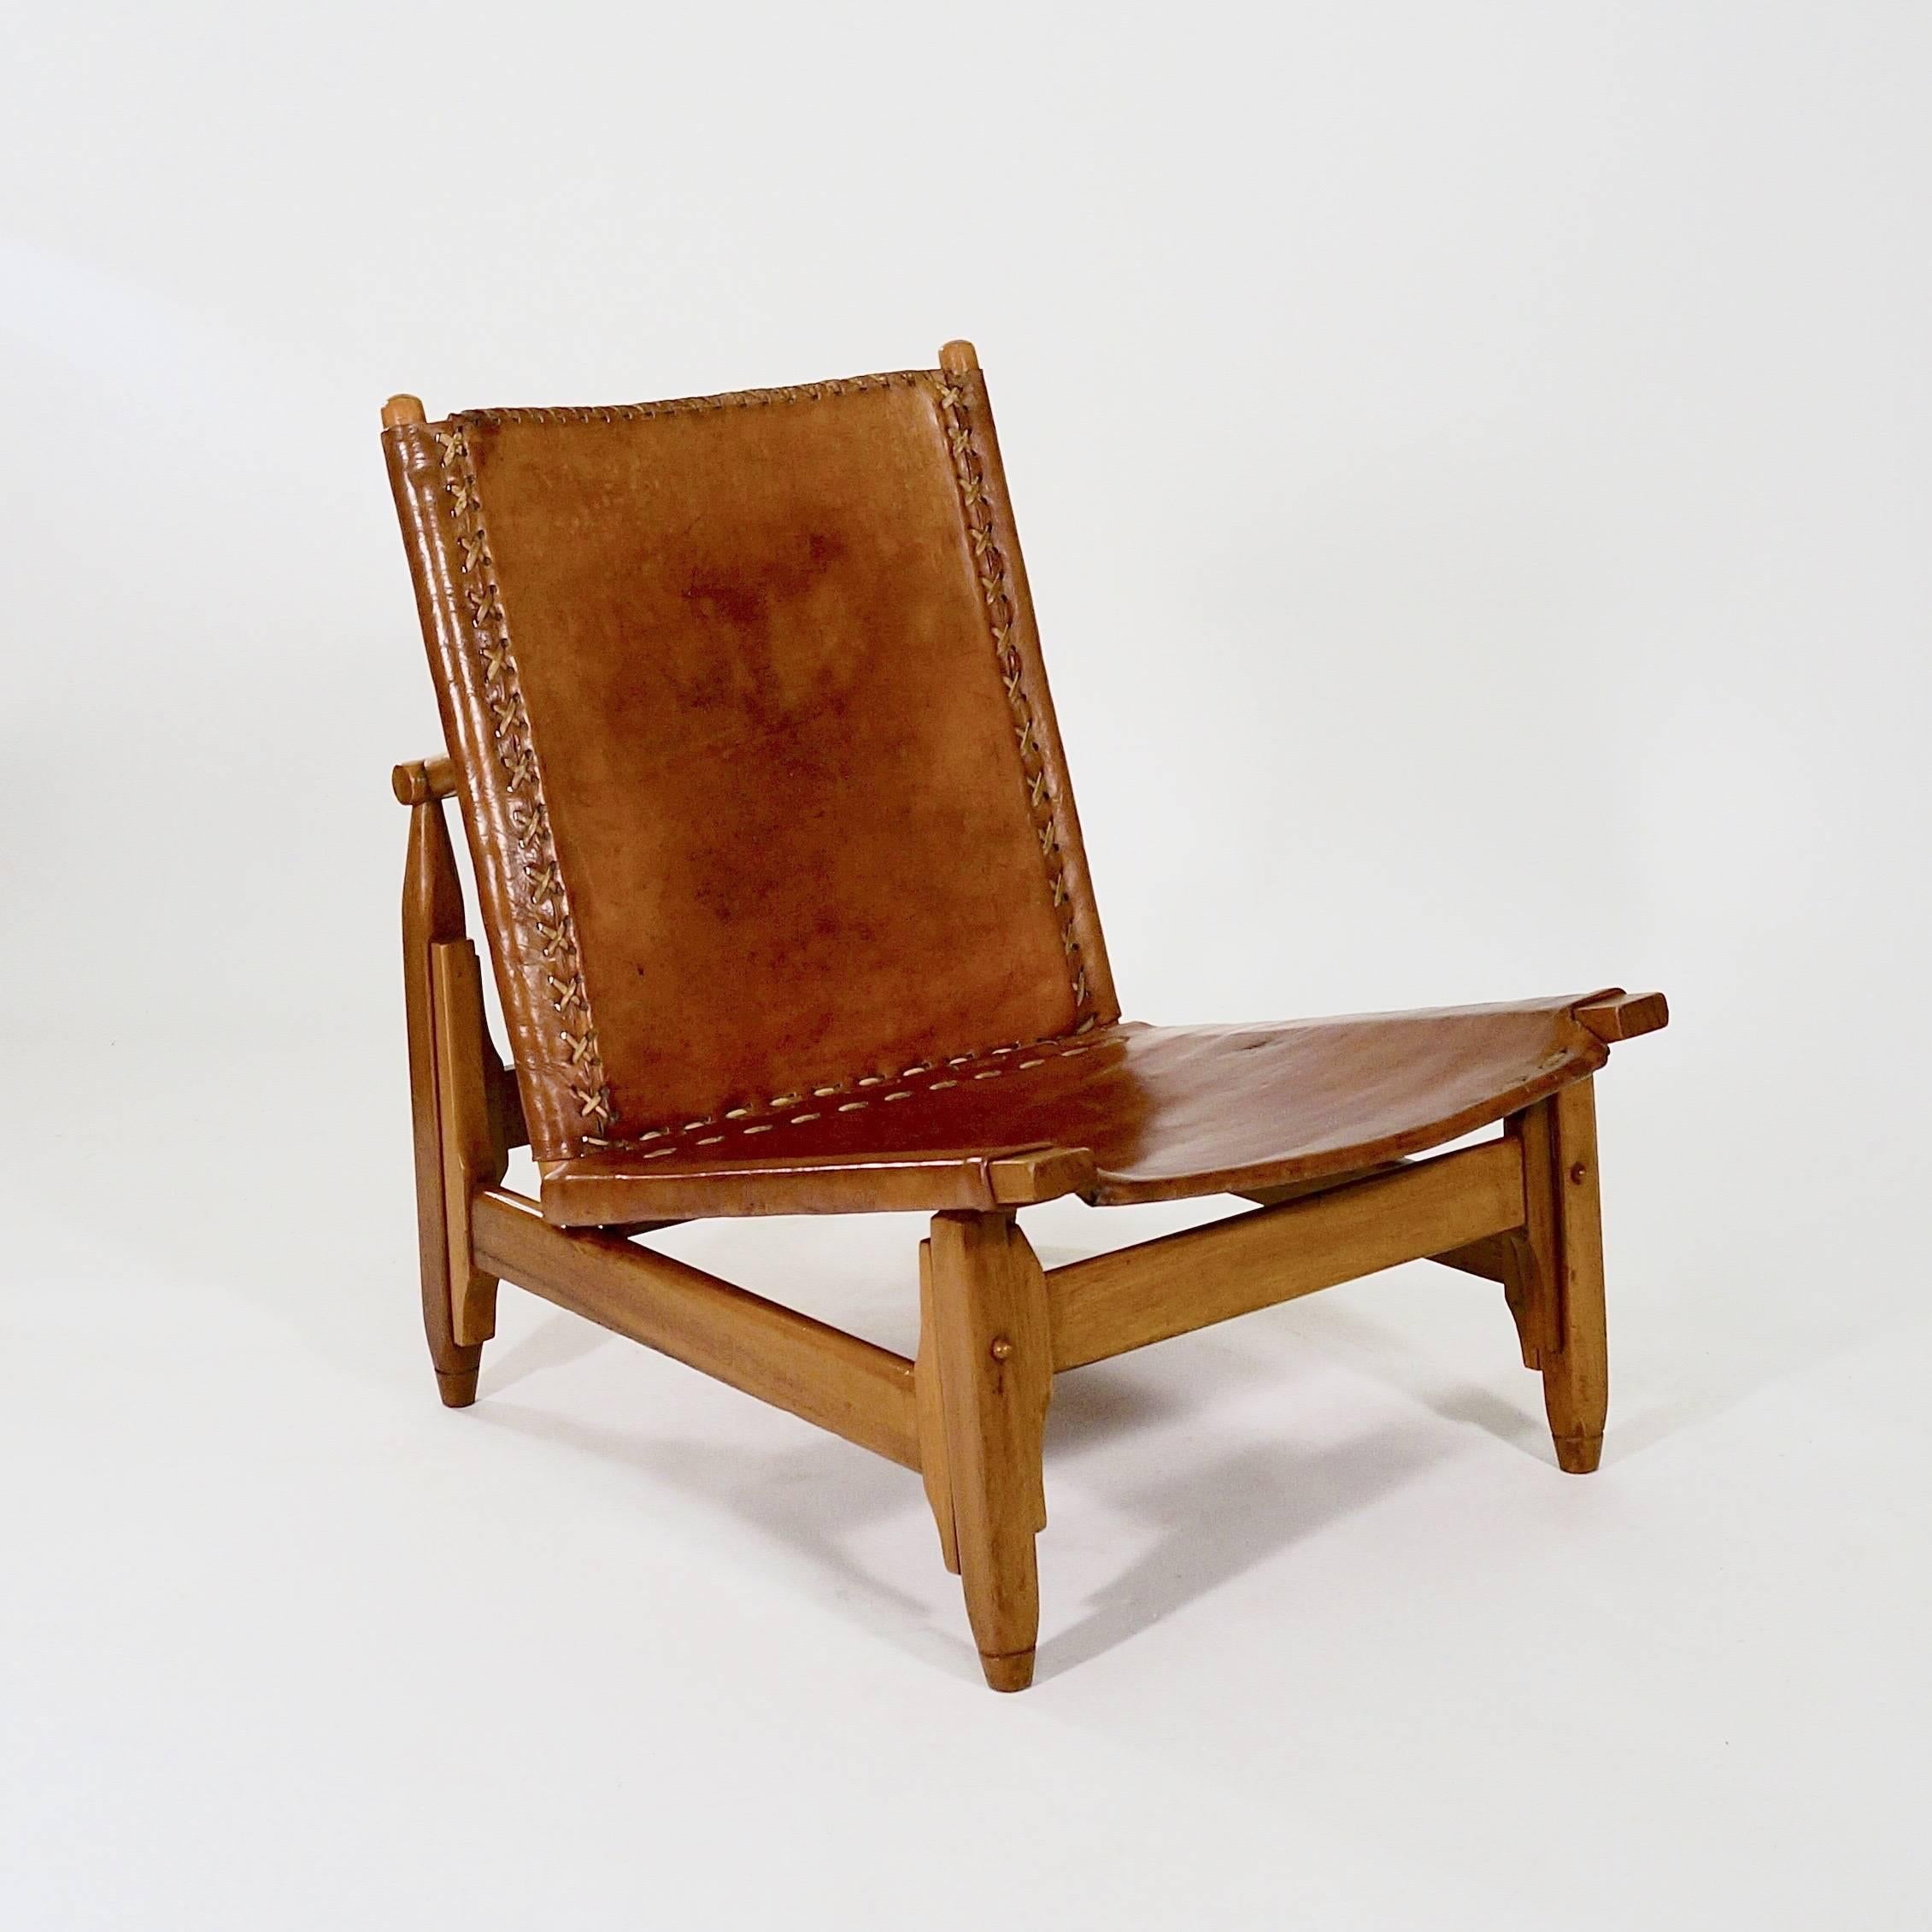 Each with a walnut frame, supporting saddle-stitched tan leather raked back and angled seat. With adjustable supports to allow movement in the leather.

Probably, Sweden, circa 1940s.